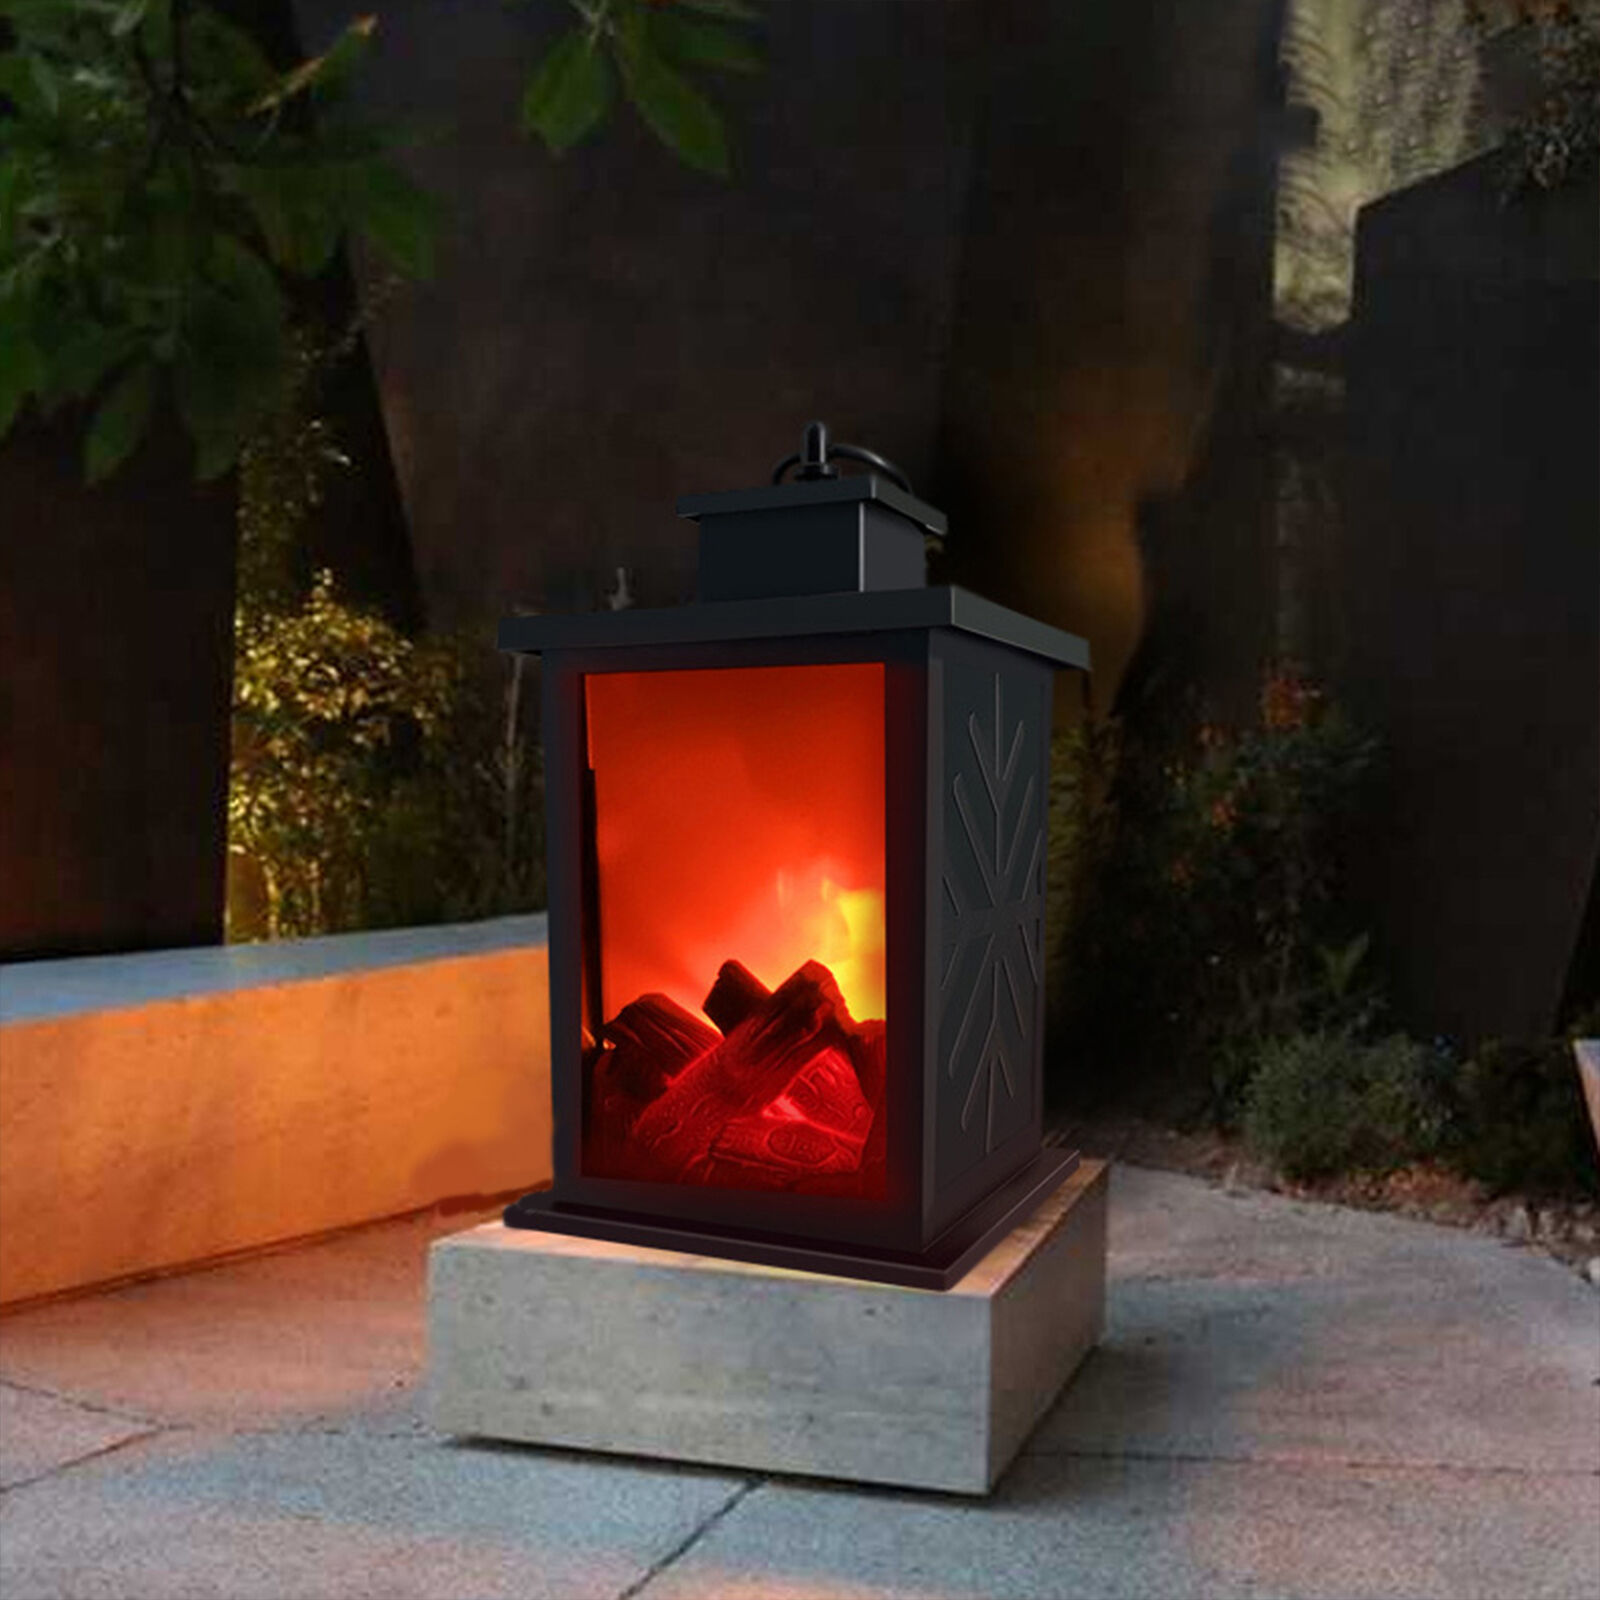 Fireplace Decor Battery Operated Realistic Flame LED Flame Lights Indoor  Faux | eBay